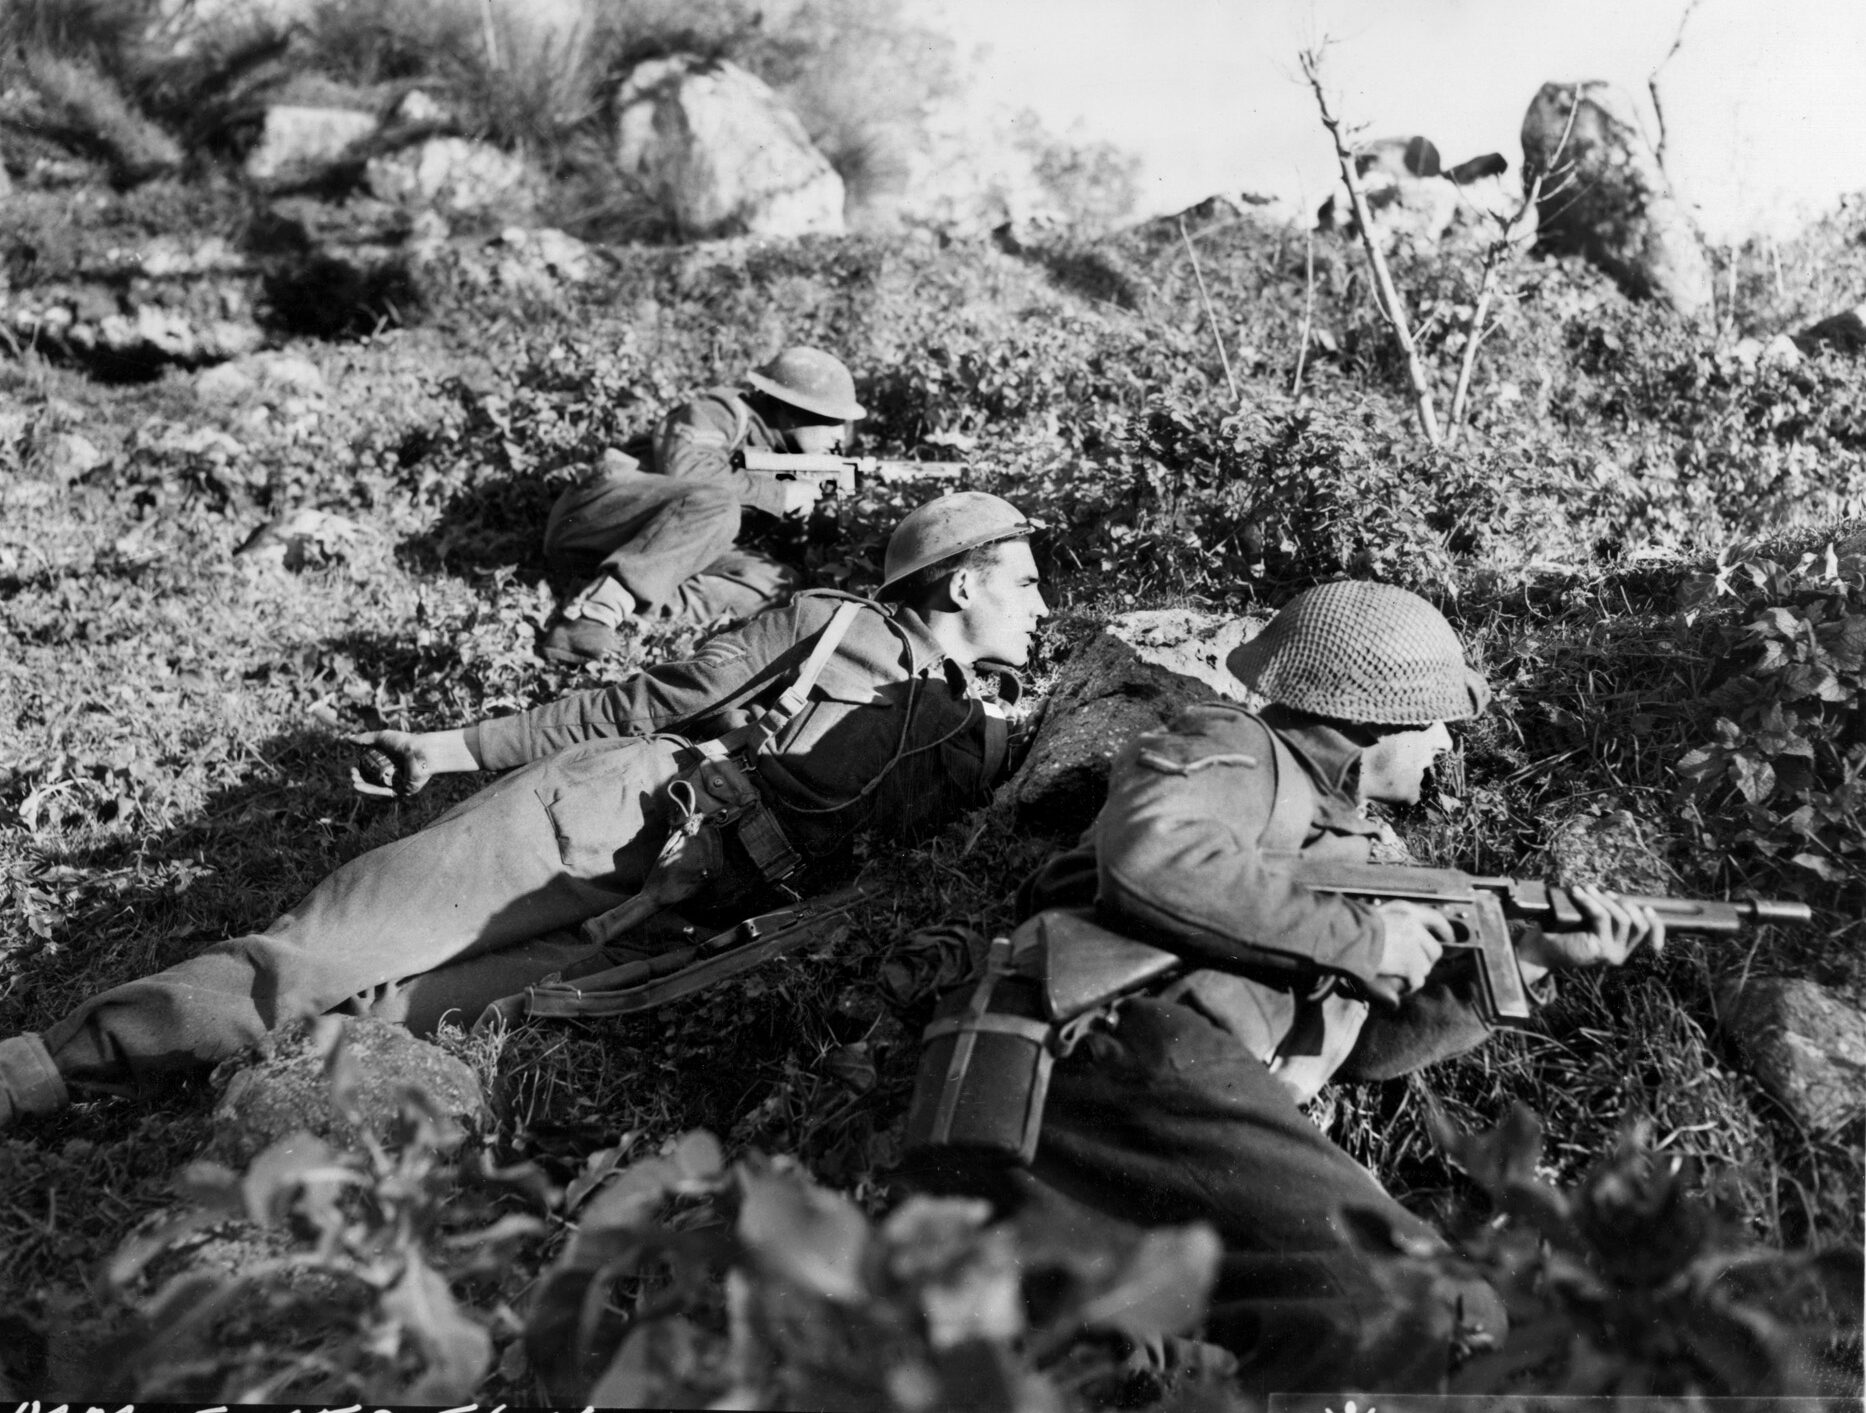 British soldiers in the beachhead's northern sector fought tenaciously against the Germans in a desperate bid to break out into the open, but the Germans launched heavy counterattacks against their narrow bulge. 